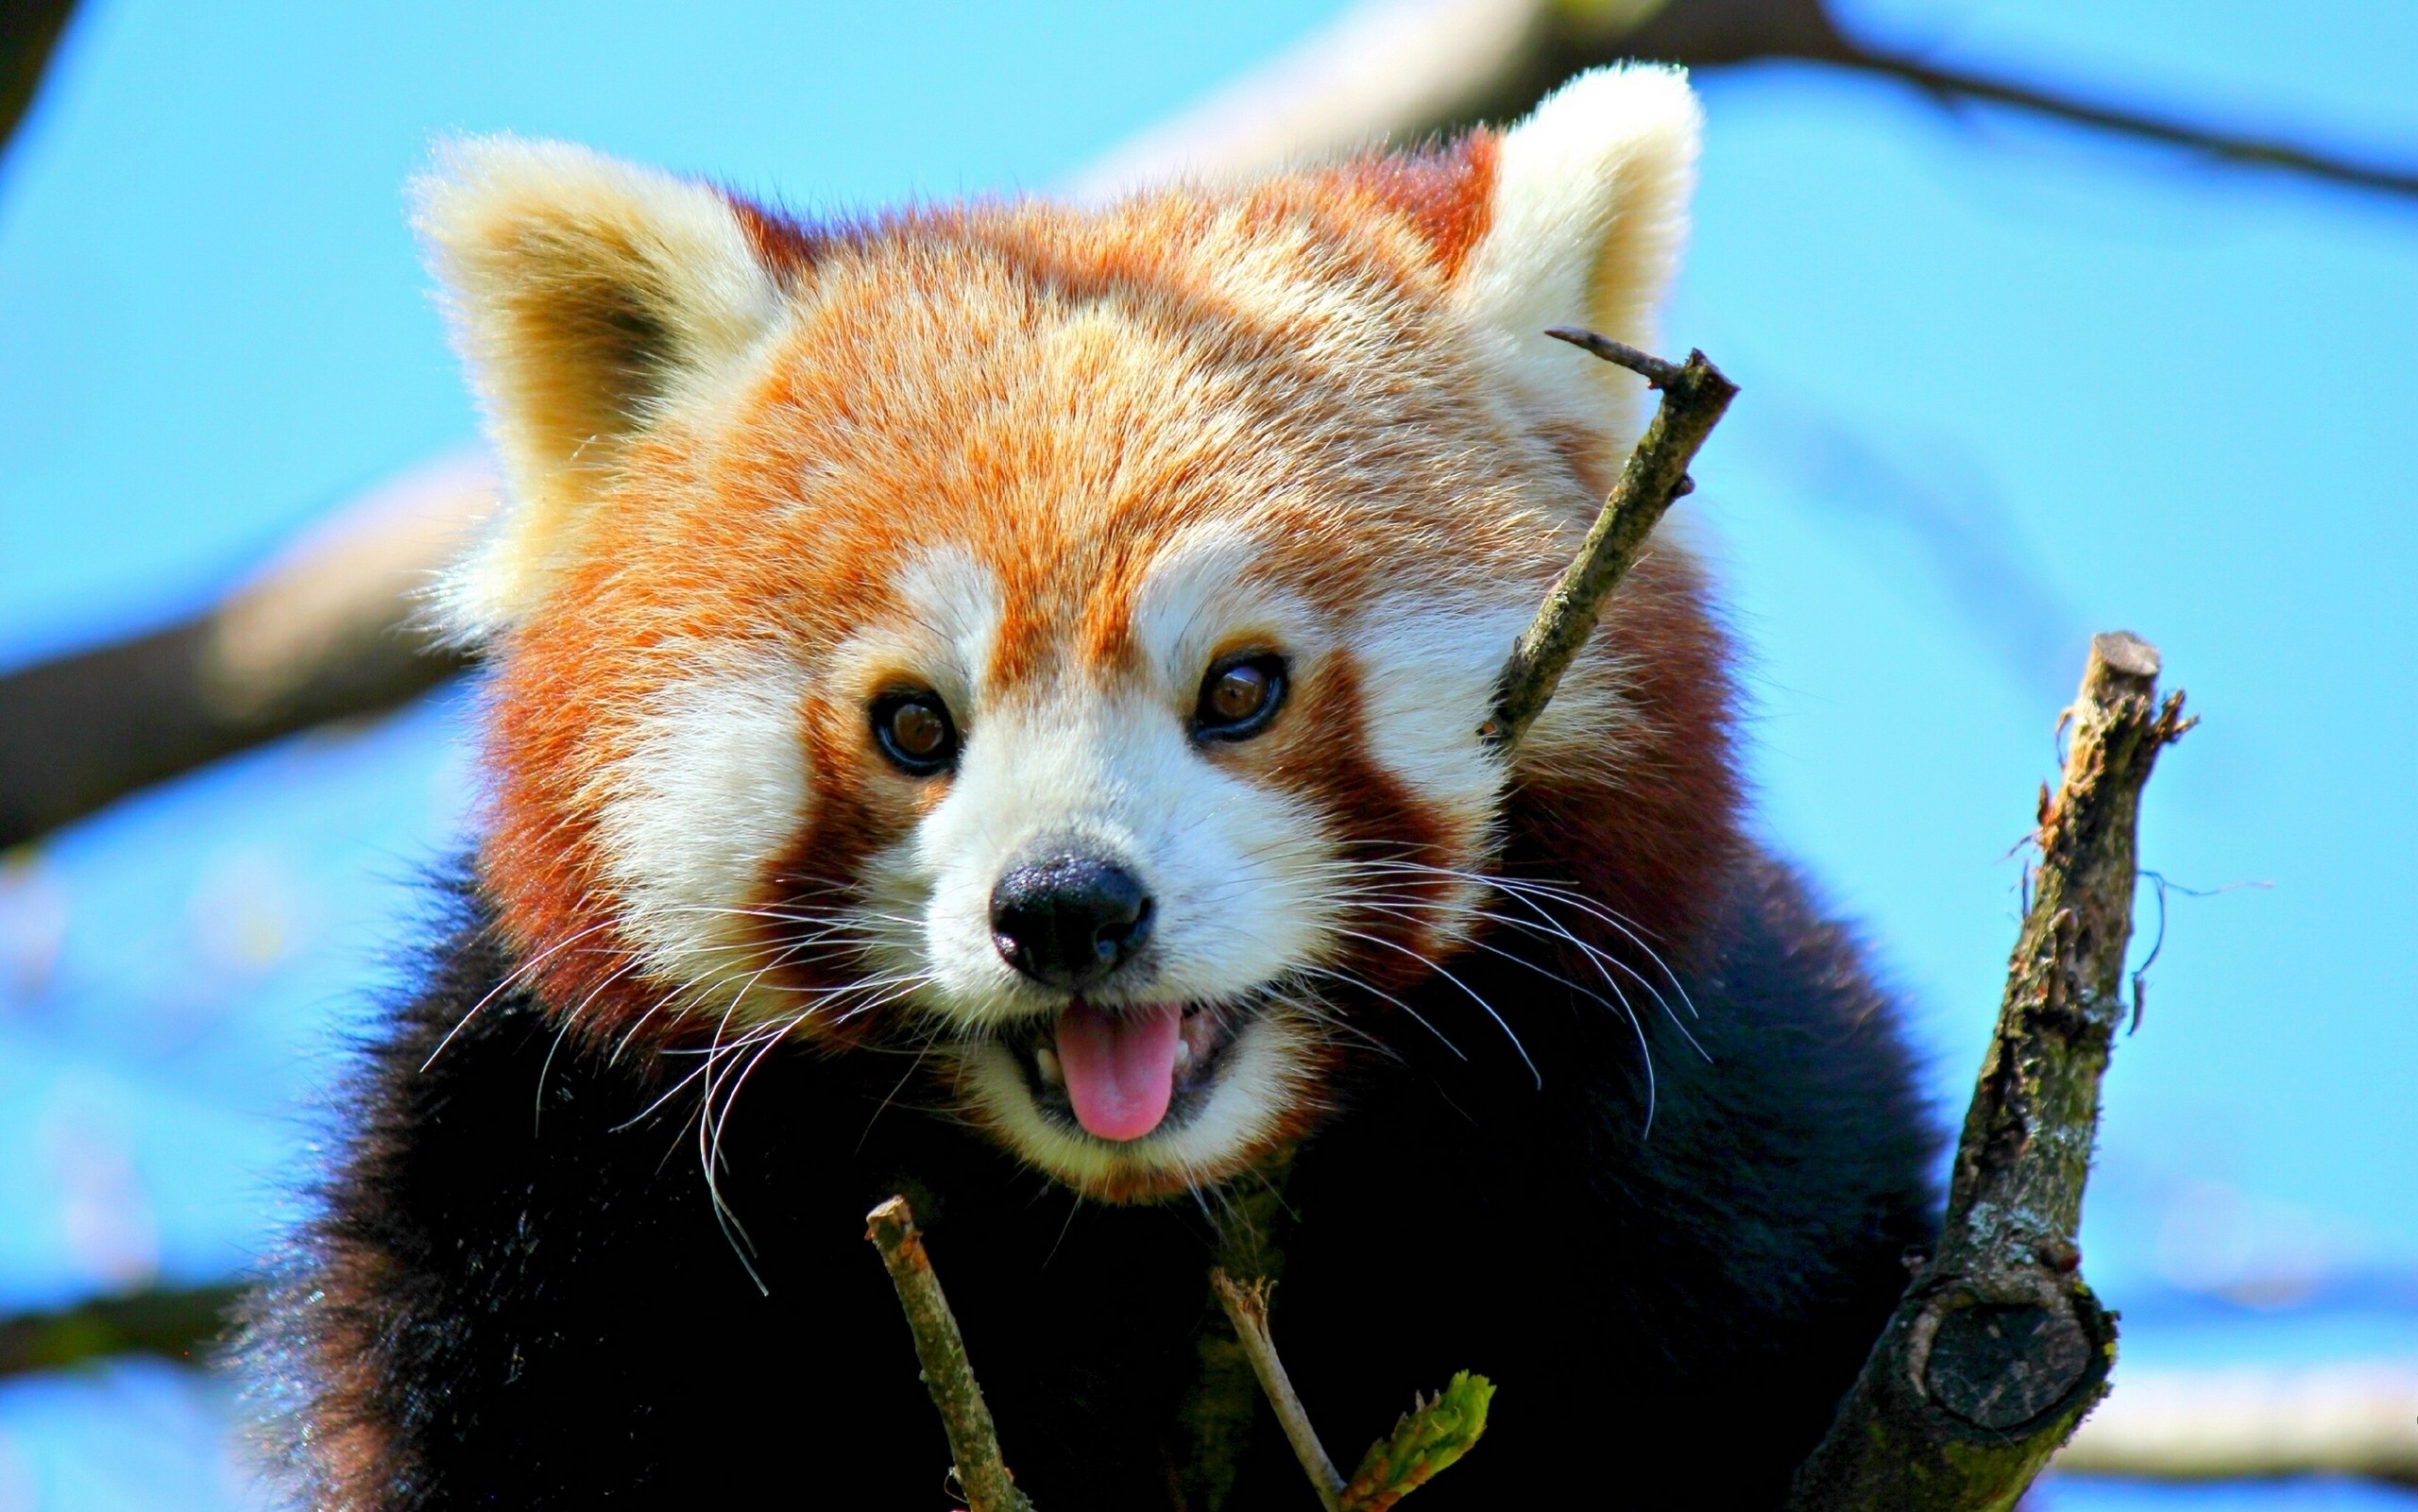 General 2560x1601 animals mammals red panda cyan closeup tongue out looking at viewer fur whiskers tongues frontal view sunlight branch